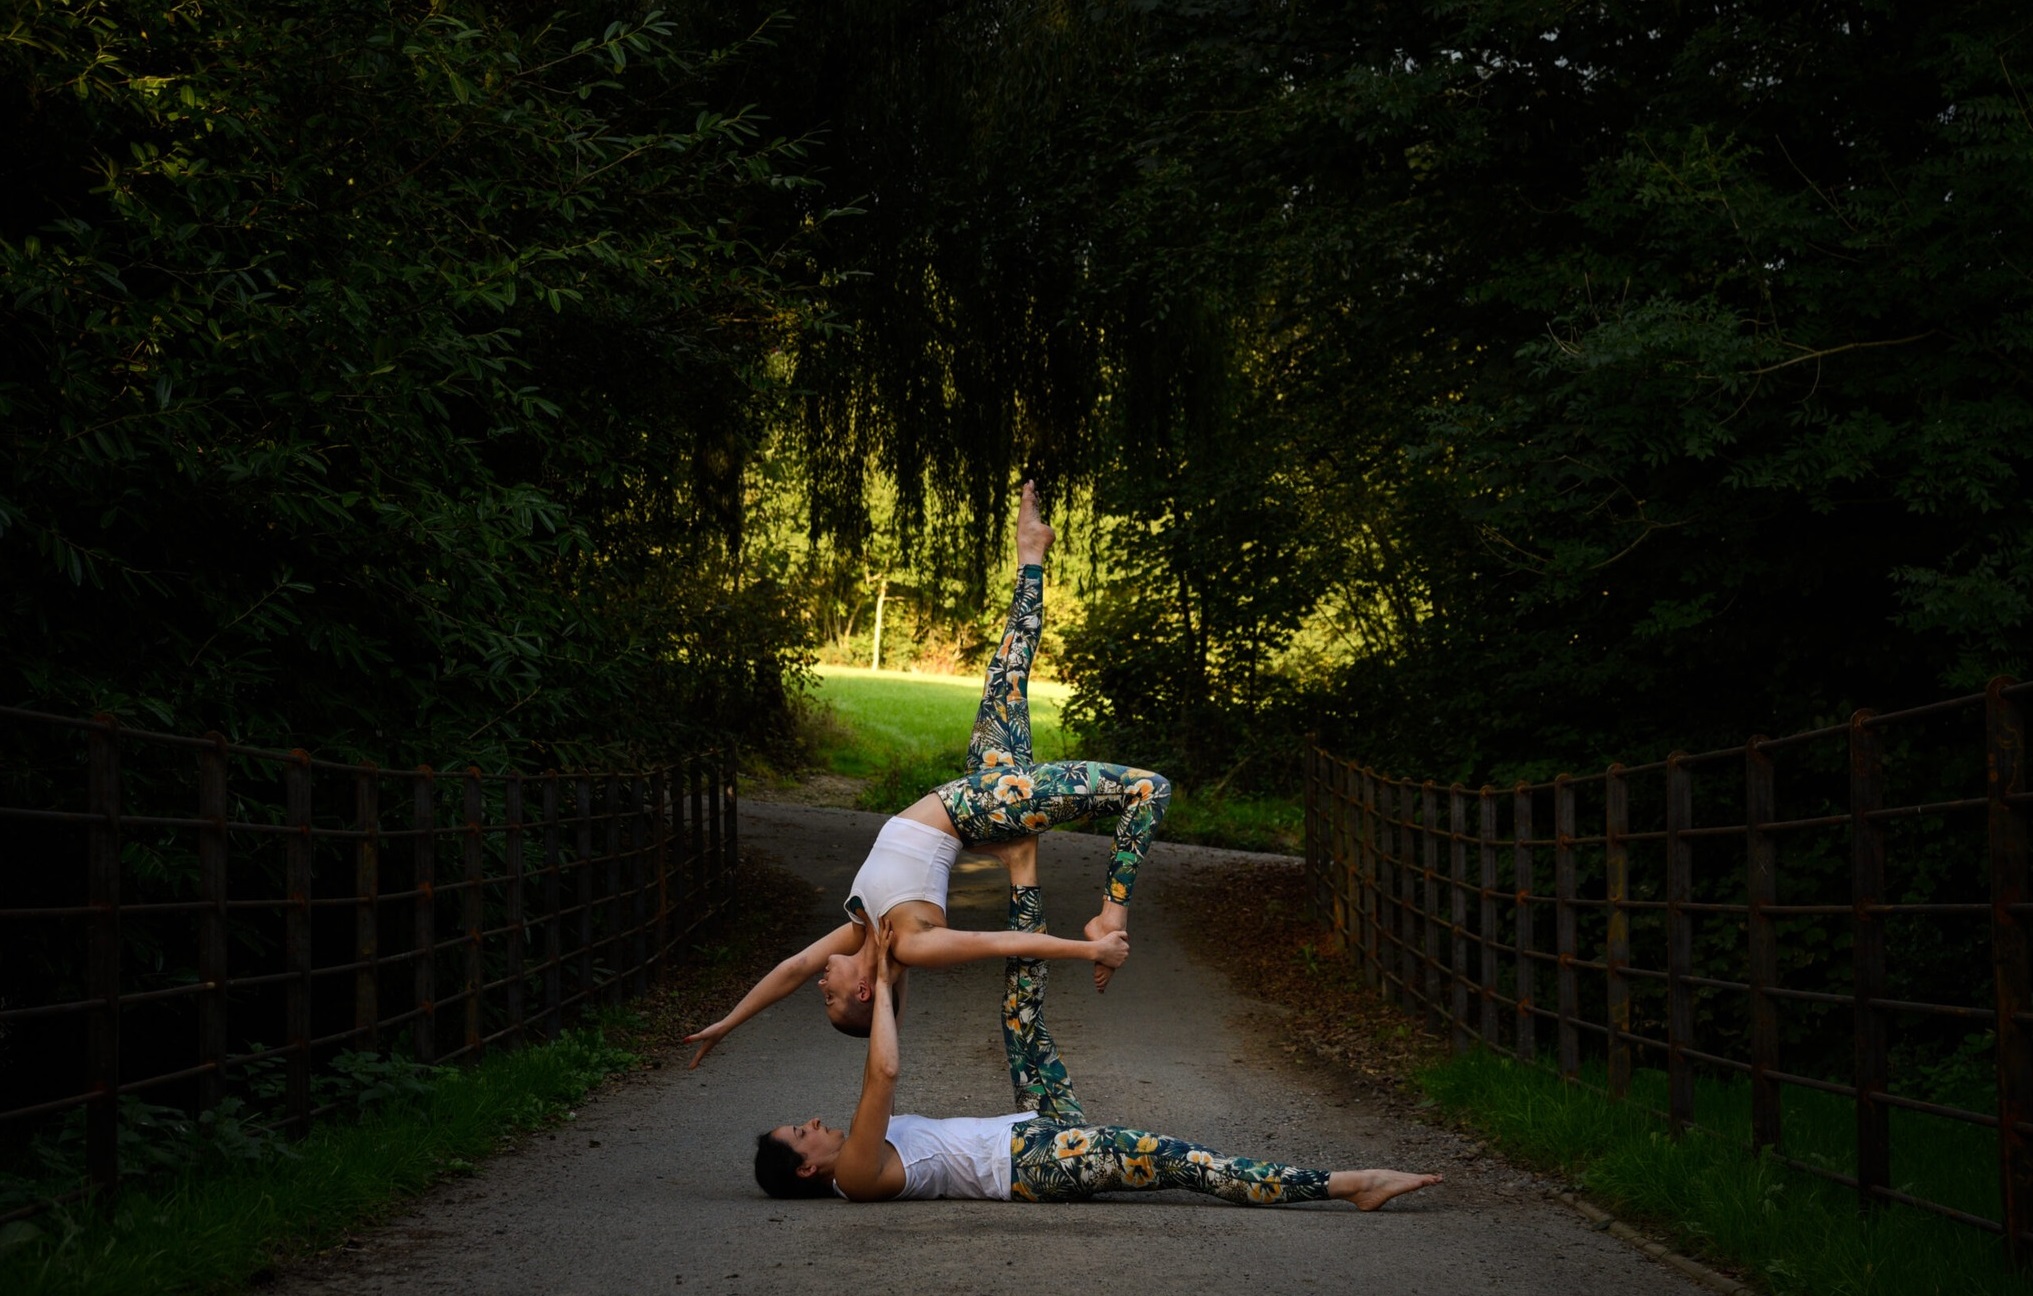 2 women in a park pathway, covered by trees. Theyr'e wearing yoga clothing and are balanced, one holding up the other in the air, who is arched back and left leg up in a striking pose